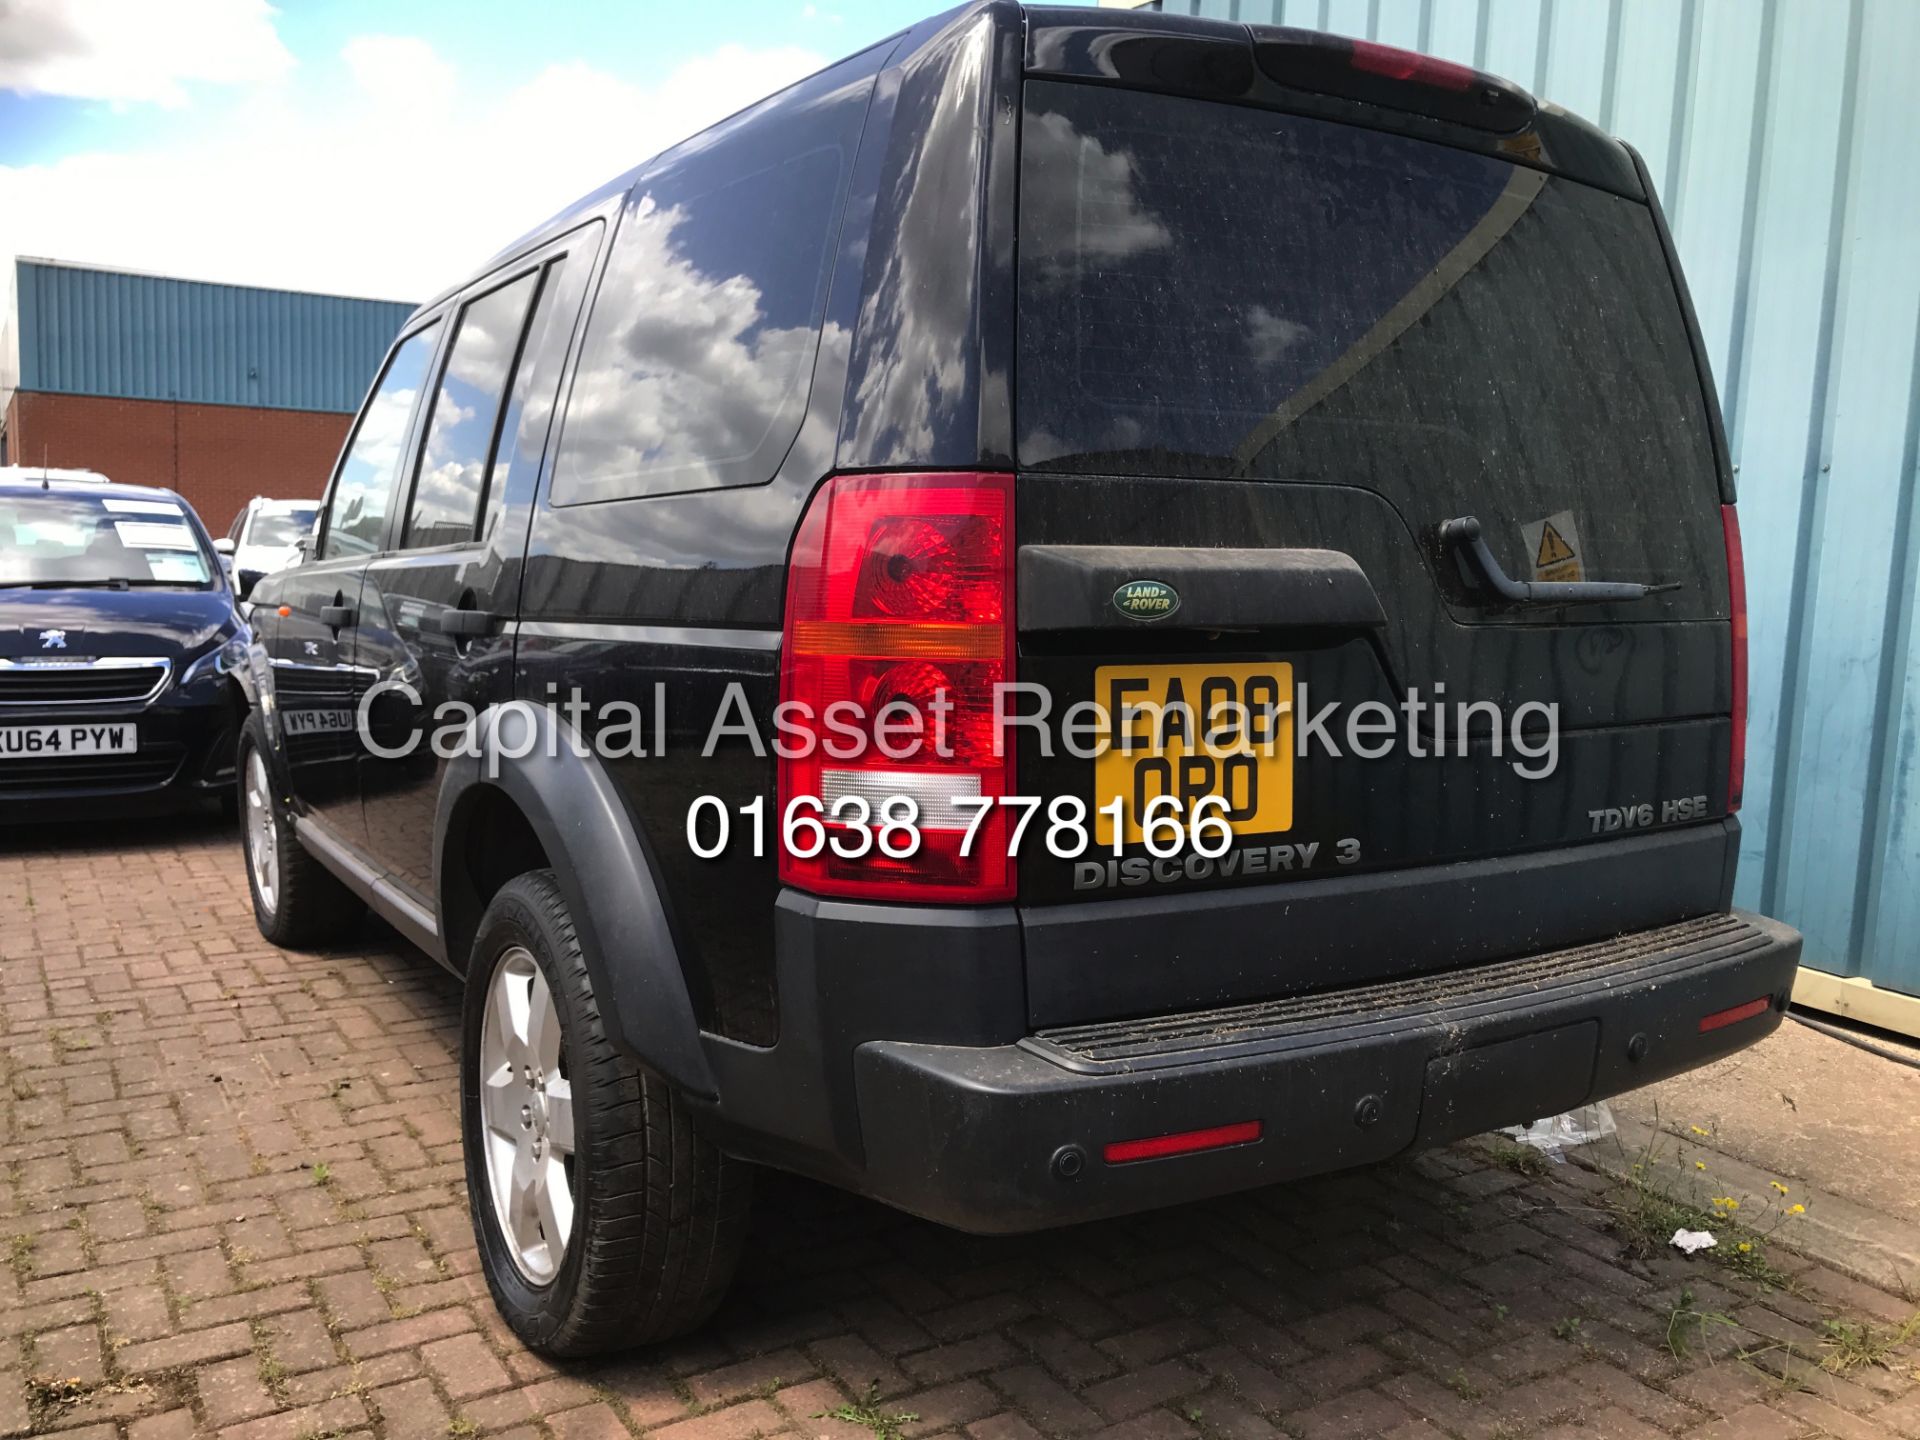 (ON SALE) LANDROVER DISCOVERY 3 "TDV6 "HSE" AUTOMATIC (08 REG) BLACK - FSH - LEATHER - SAT NAV - - Image 6 of 16